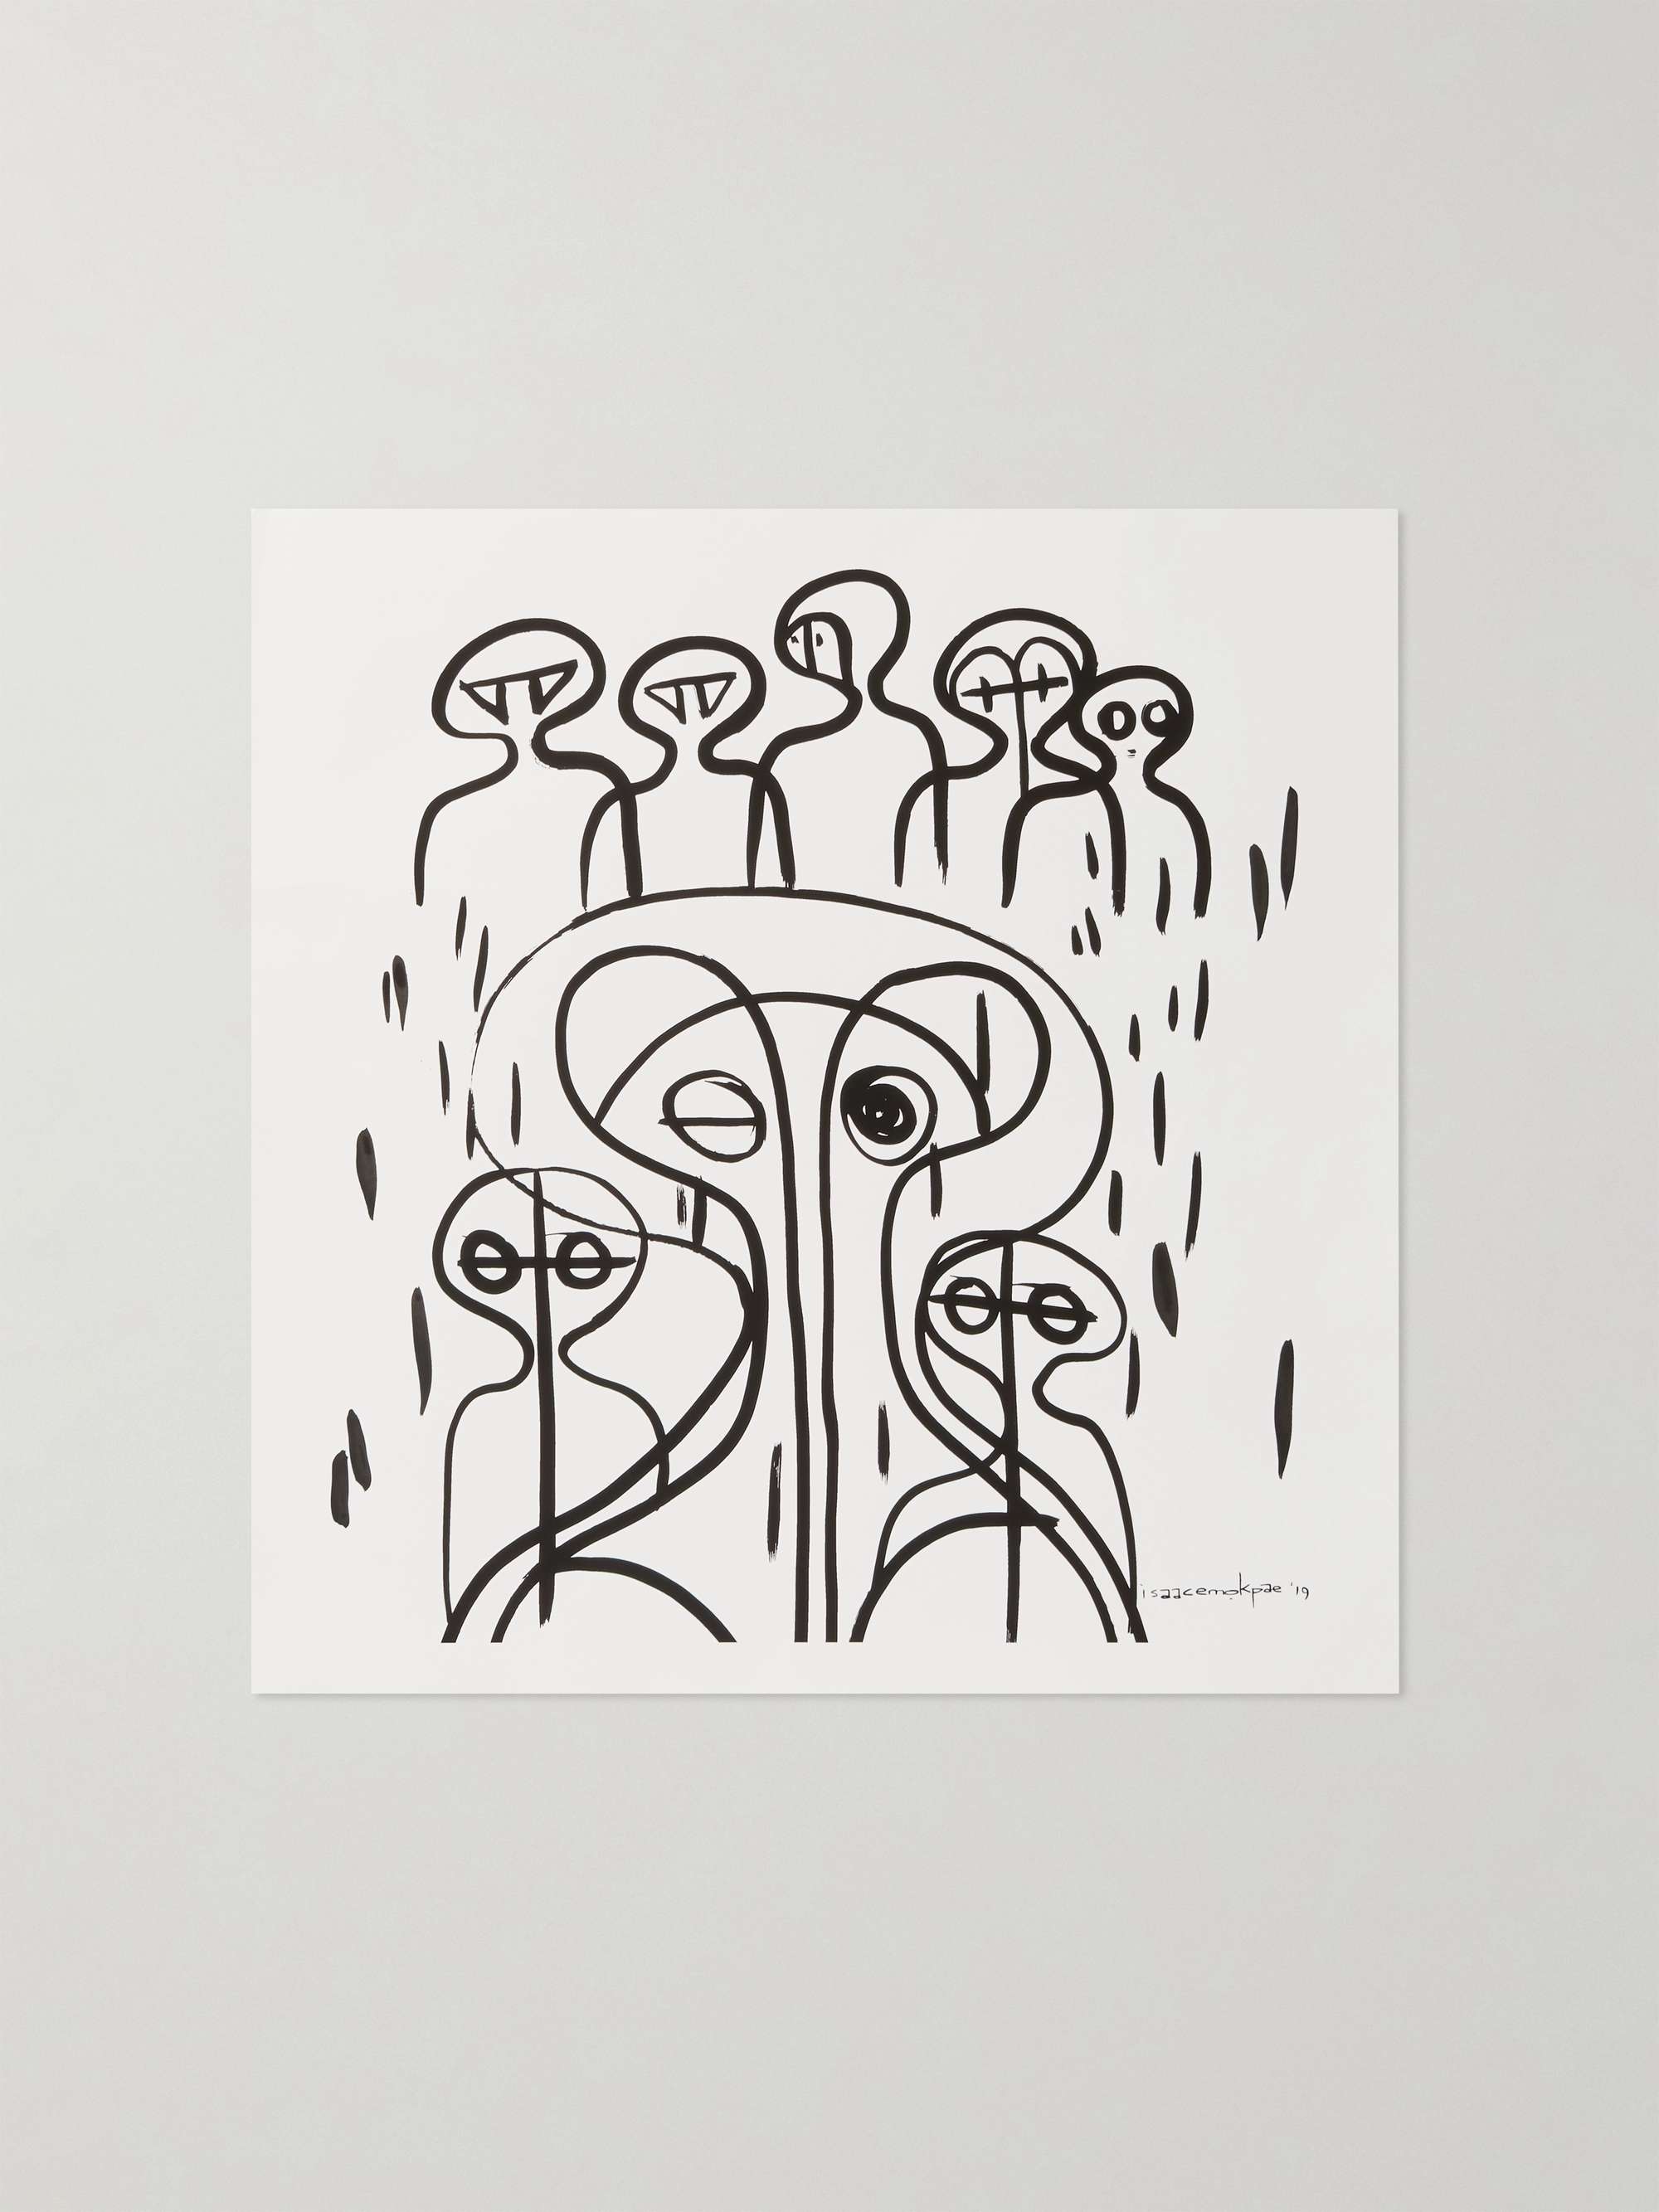 OBIDA + Isaac Emokpae Togetherness from the Monads Collection Print, 60 x 50cm